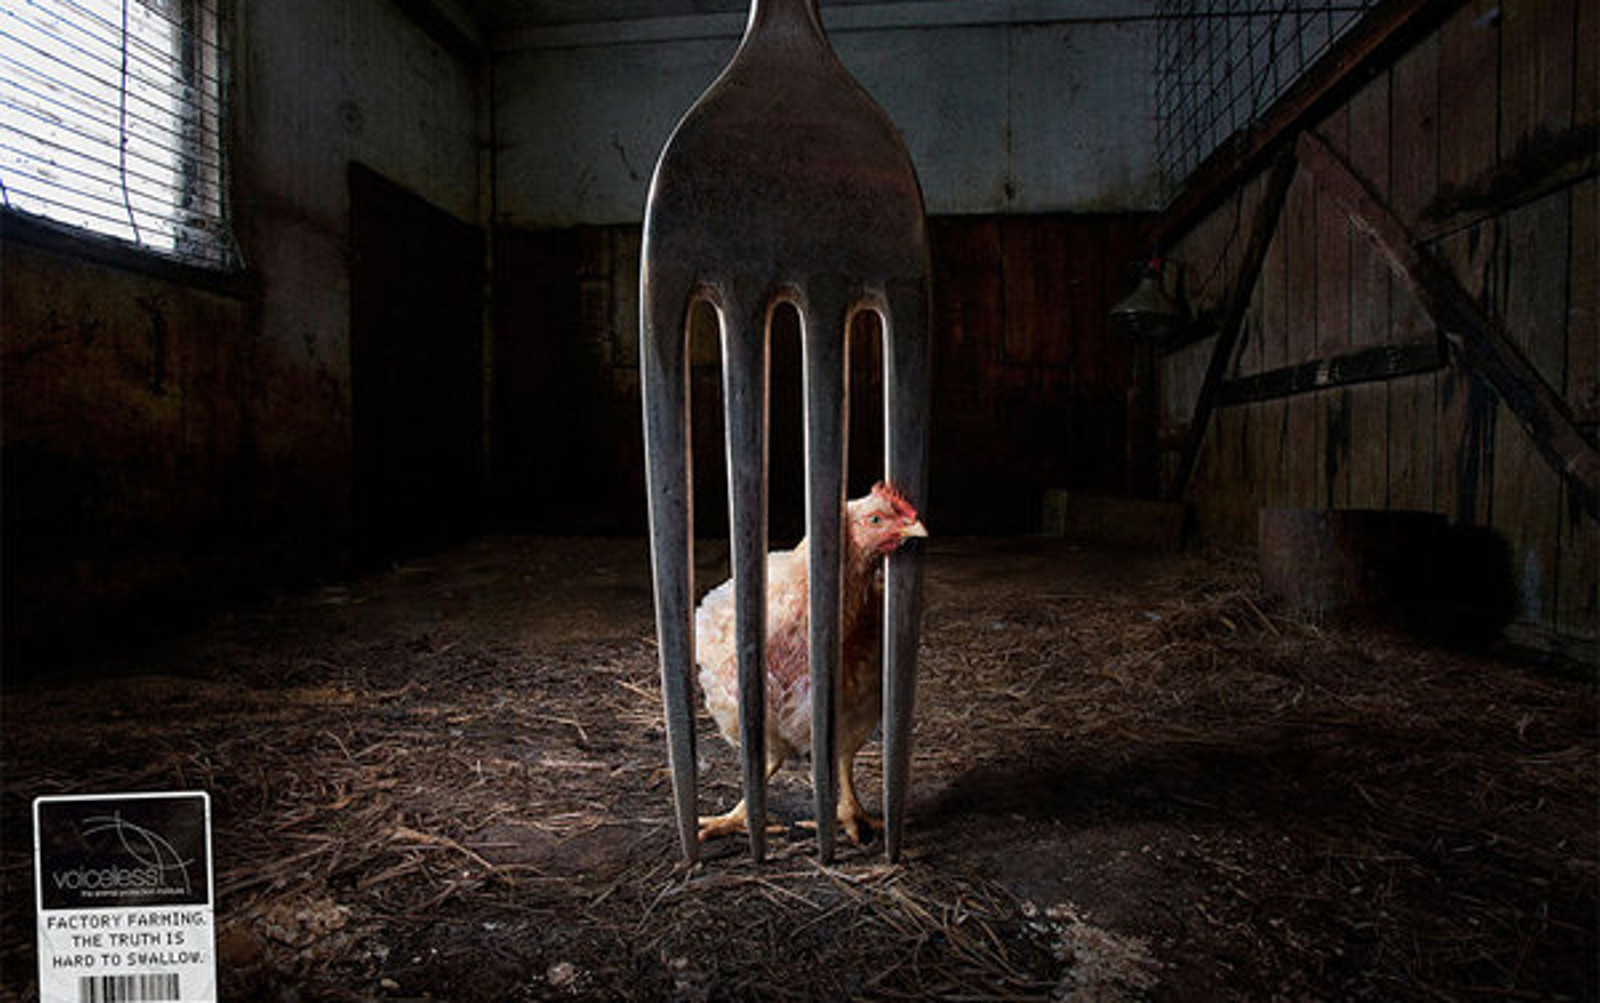 These Powerful Ads Featuring Farm Animals are Grim Reminders of Where our Food Comes From